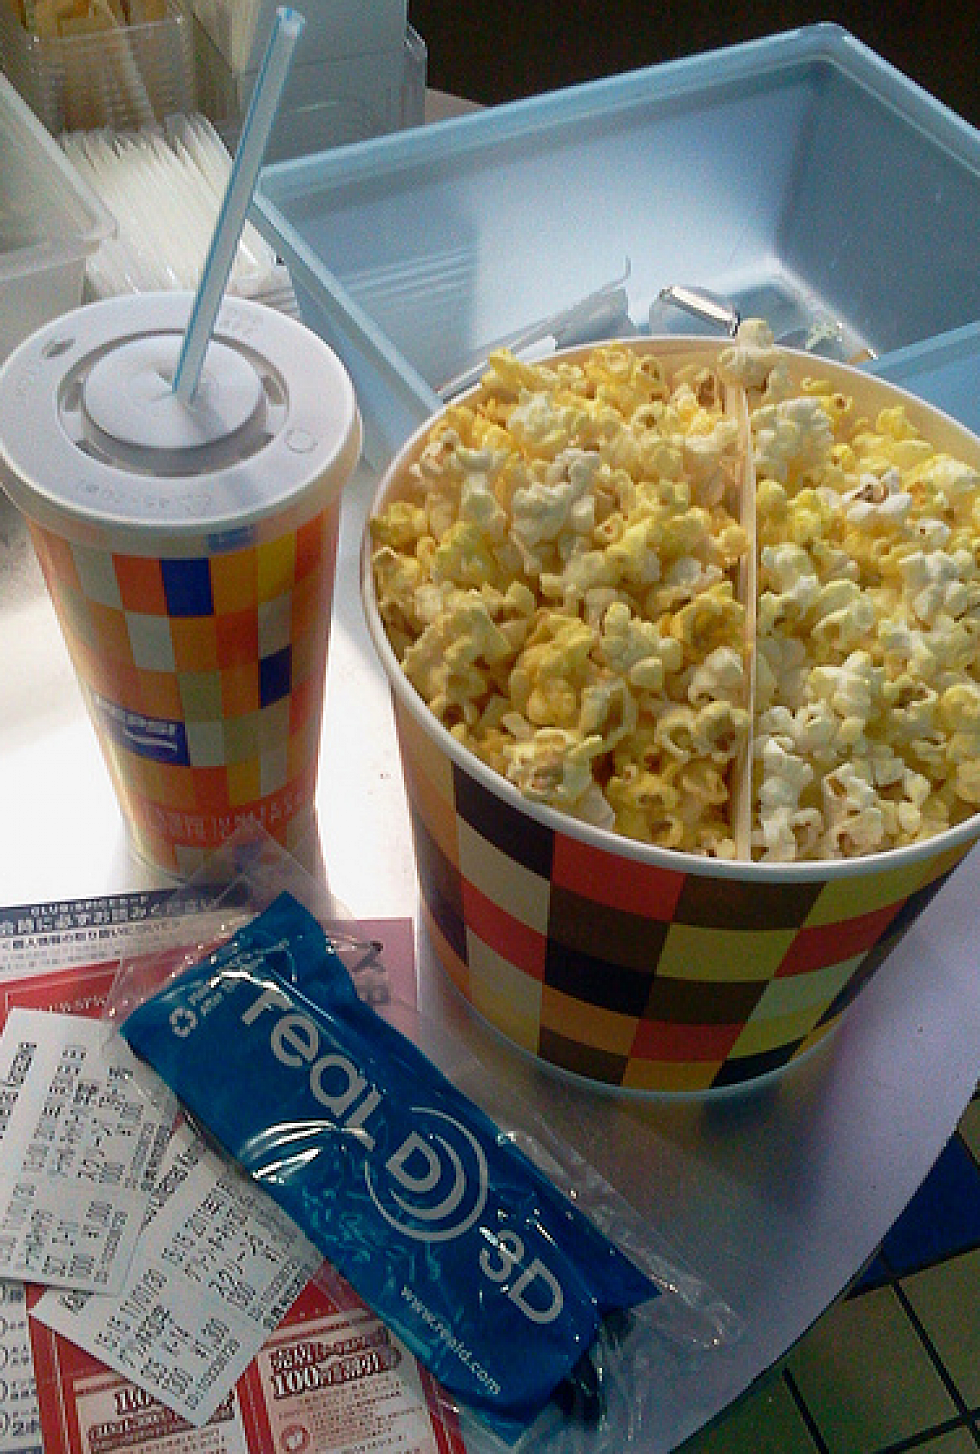 Do You Sneak Food Into The Movie Theater?